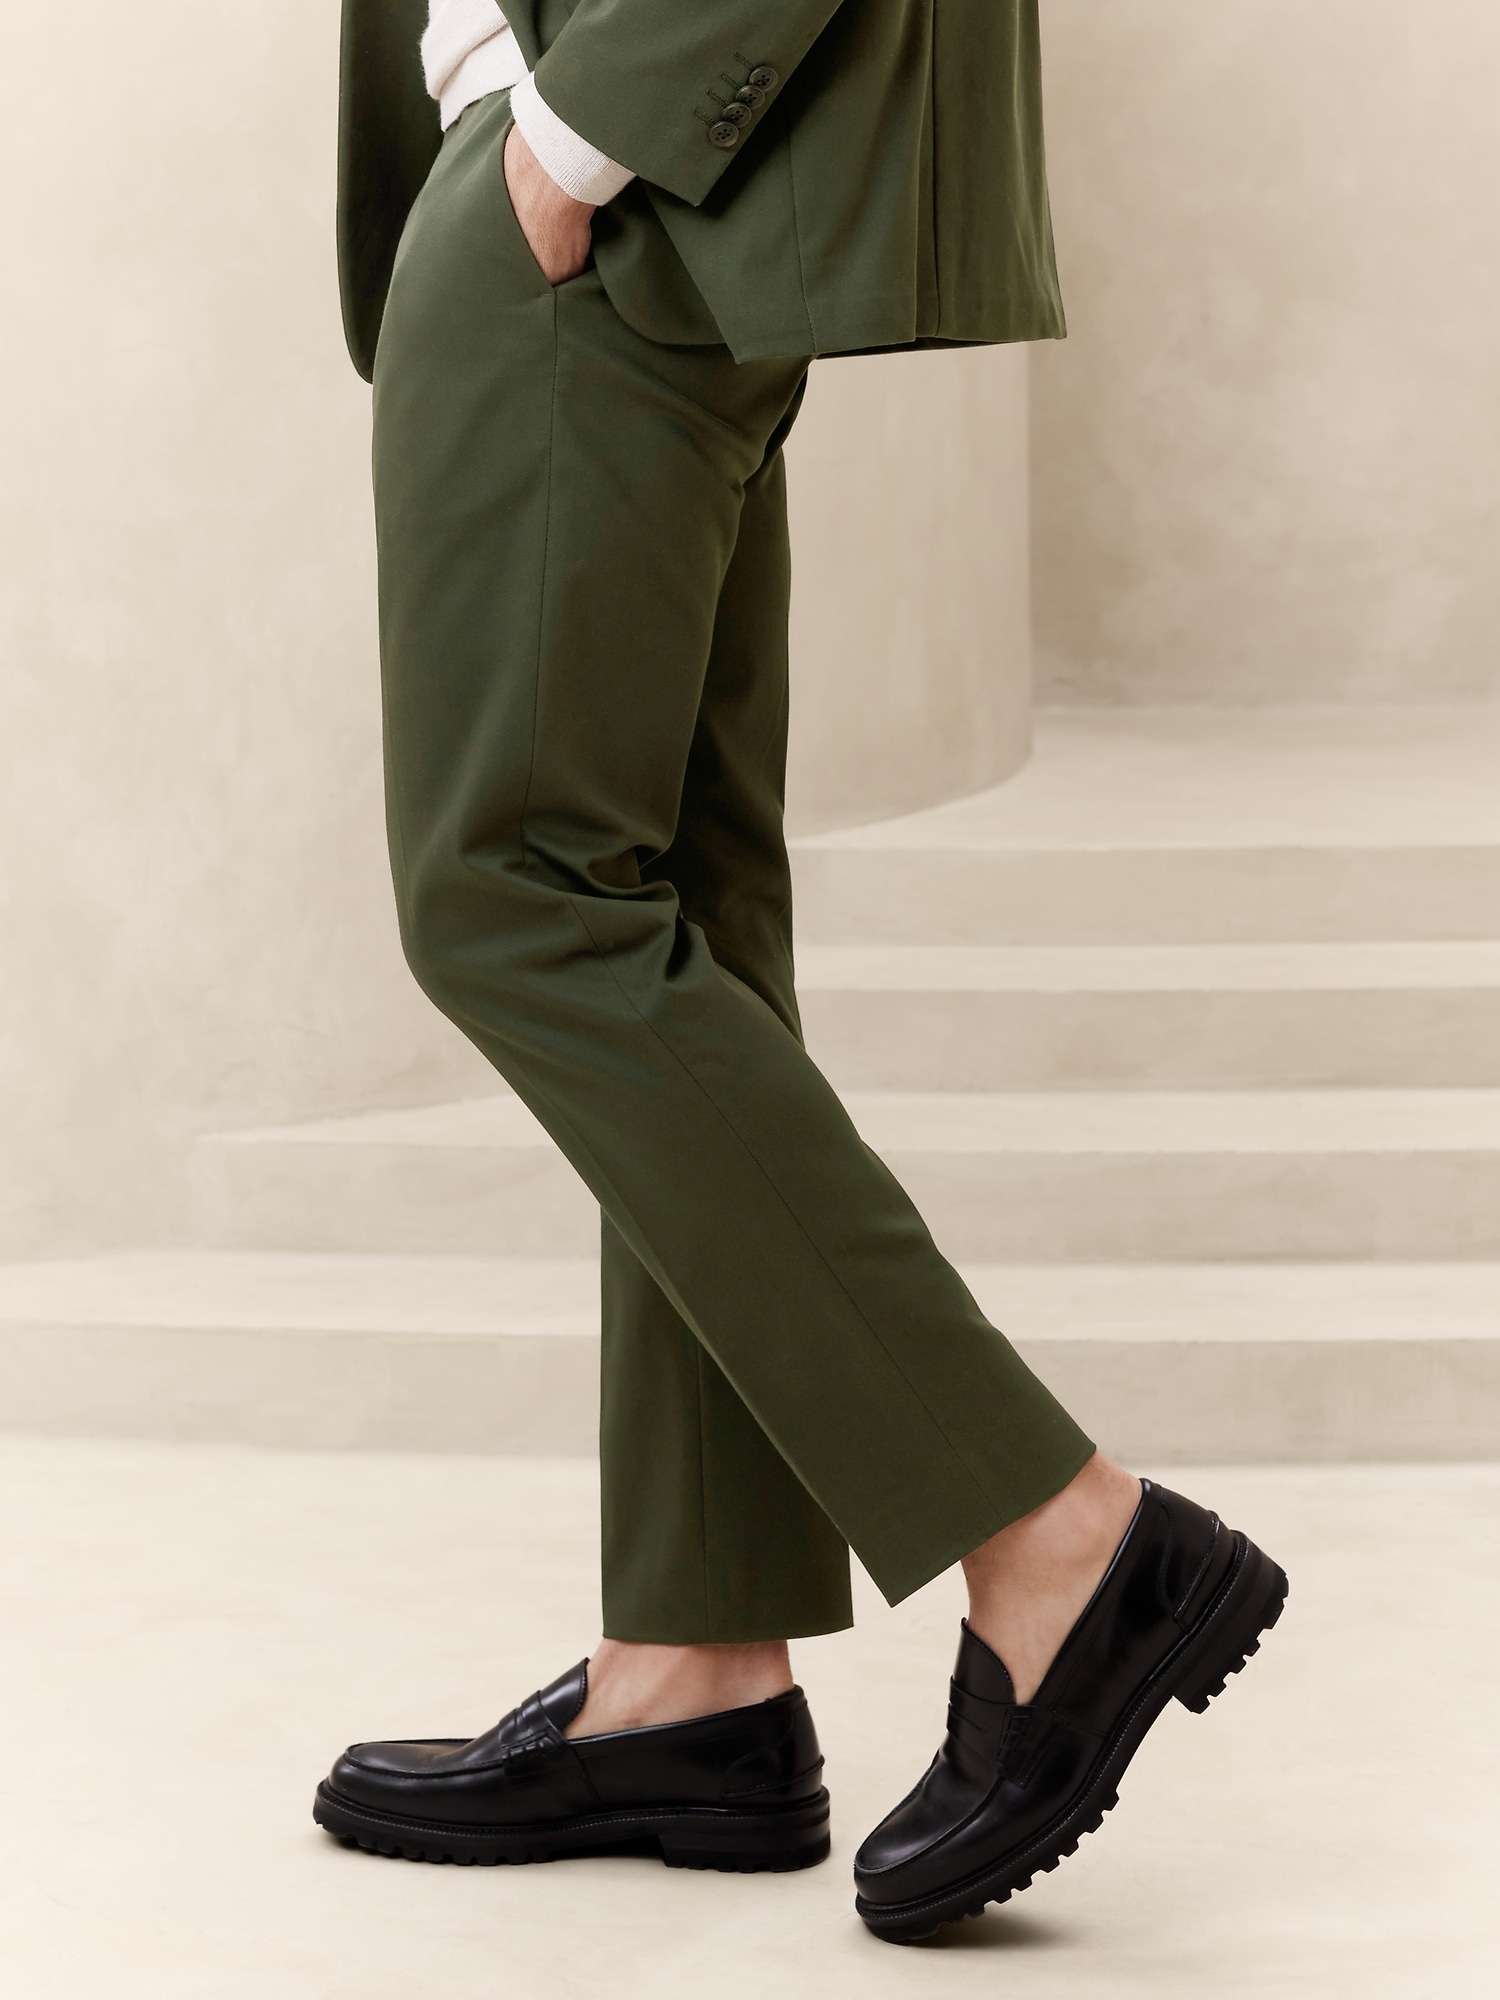 MASSIMO DUTTI Linen Blend Suit Trousers - Studio in Green | Lyst